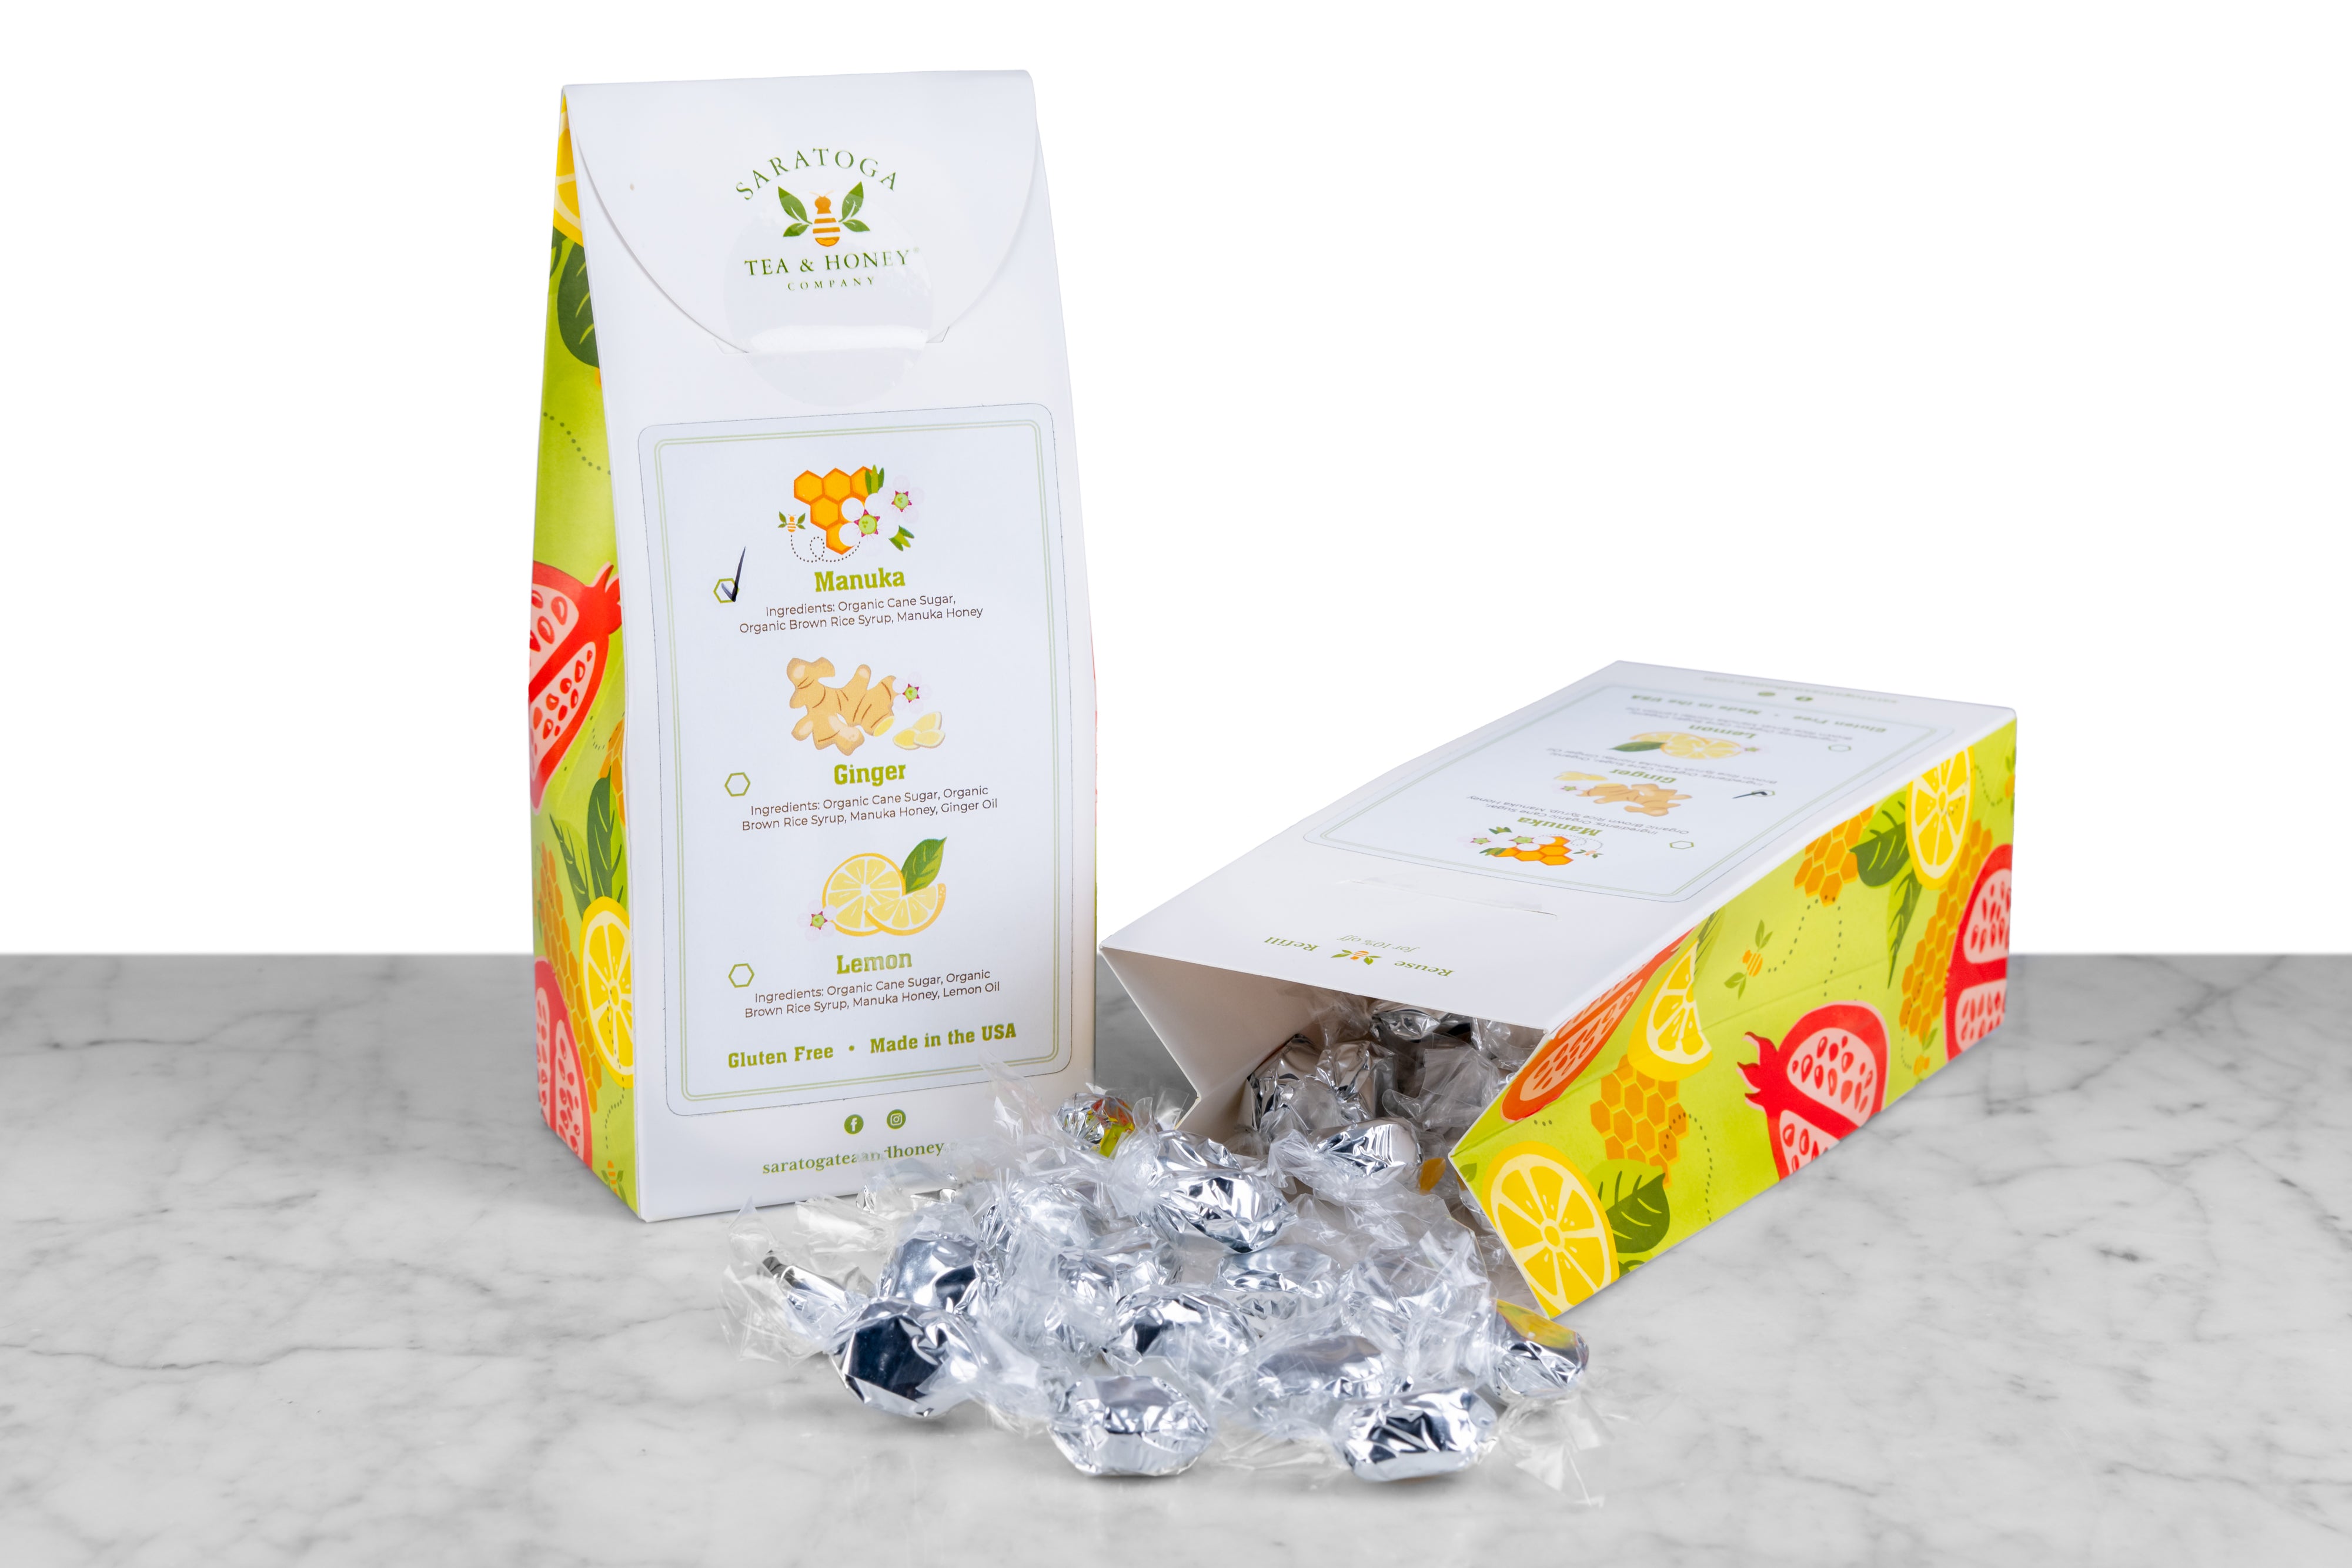 Back view of honey drop box with sticker showing manuka honey, lemon, or ginger flavor variety and spilled open box of foil wrapped honey lozenges 